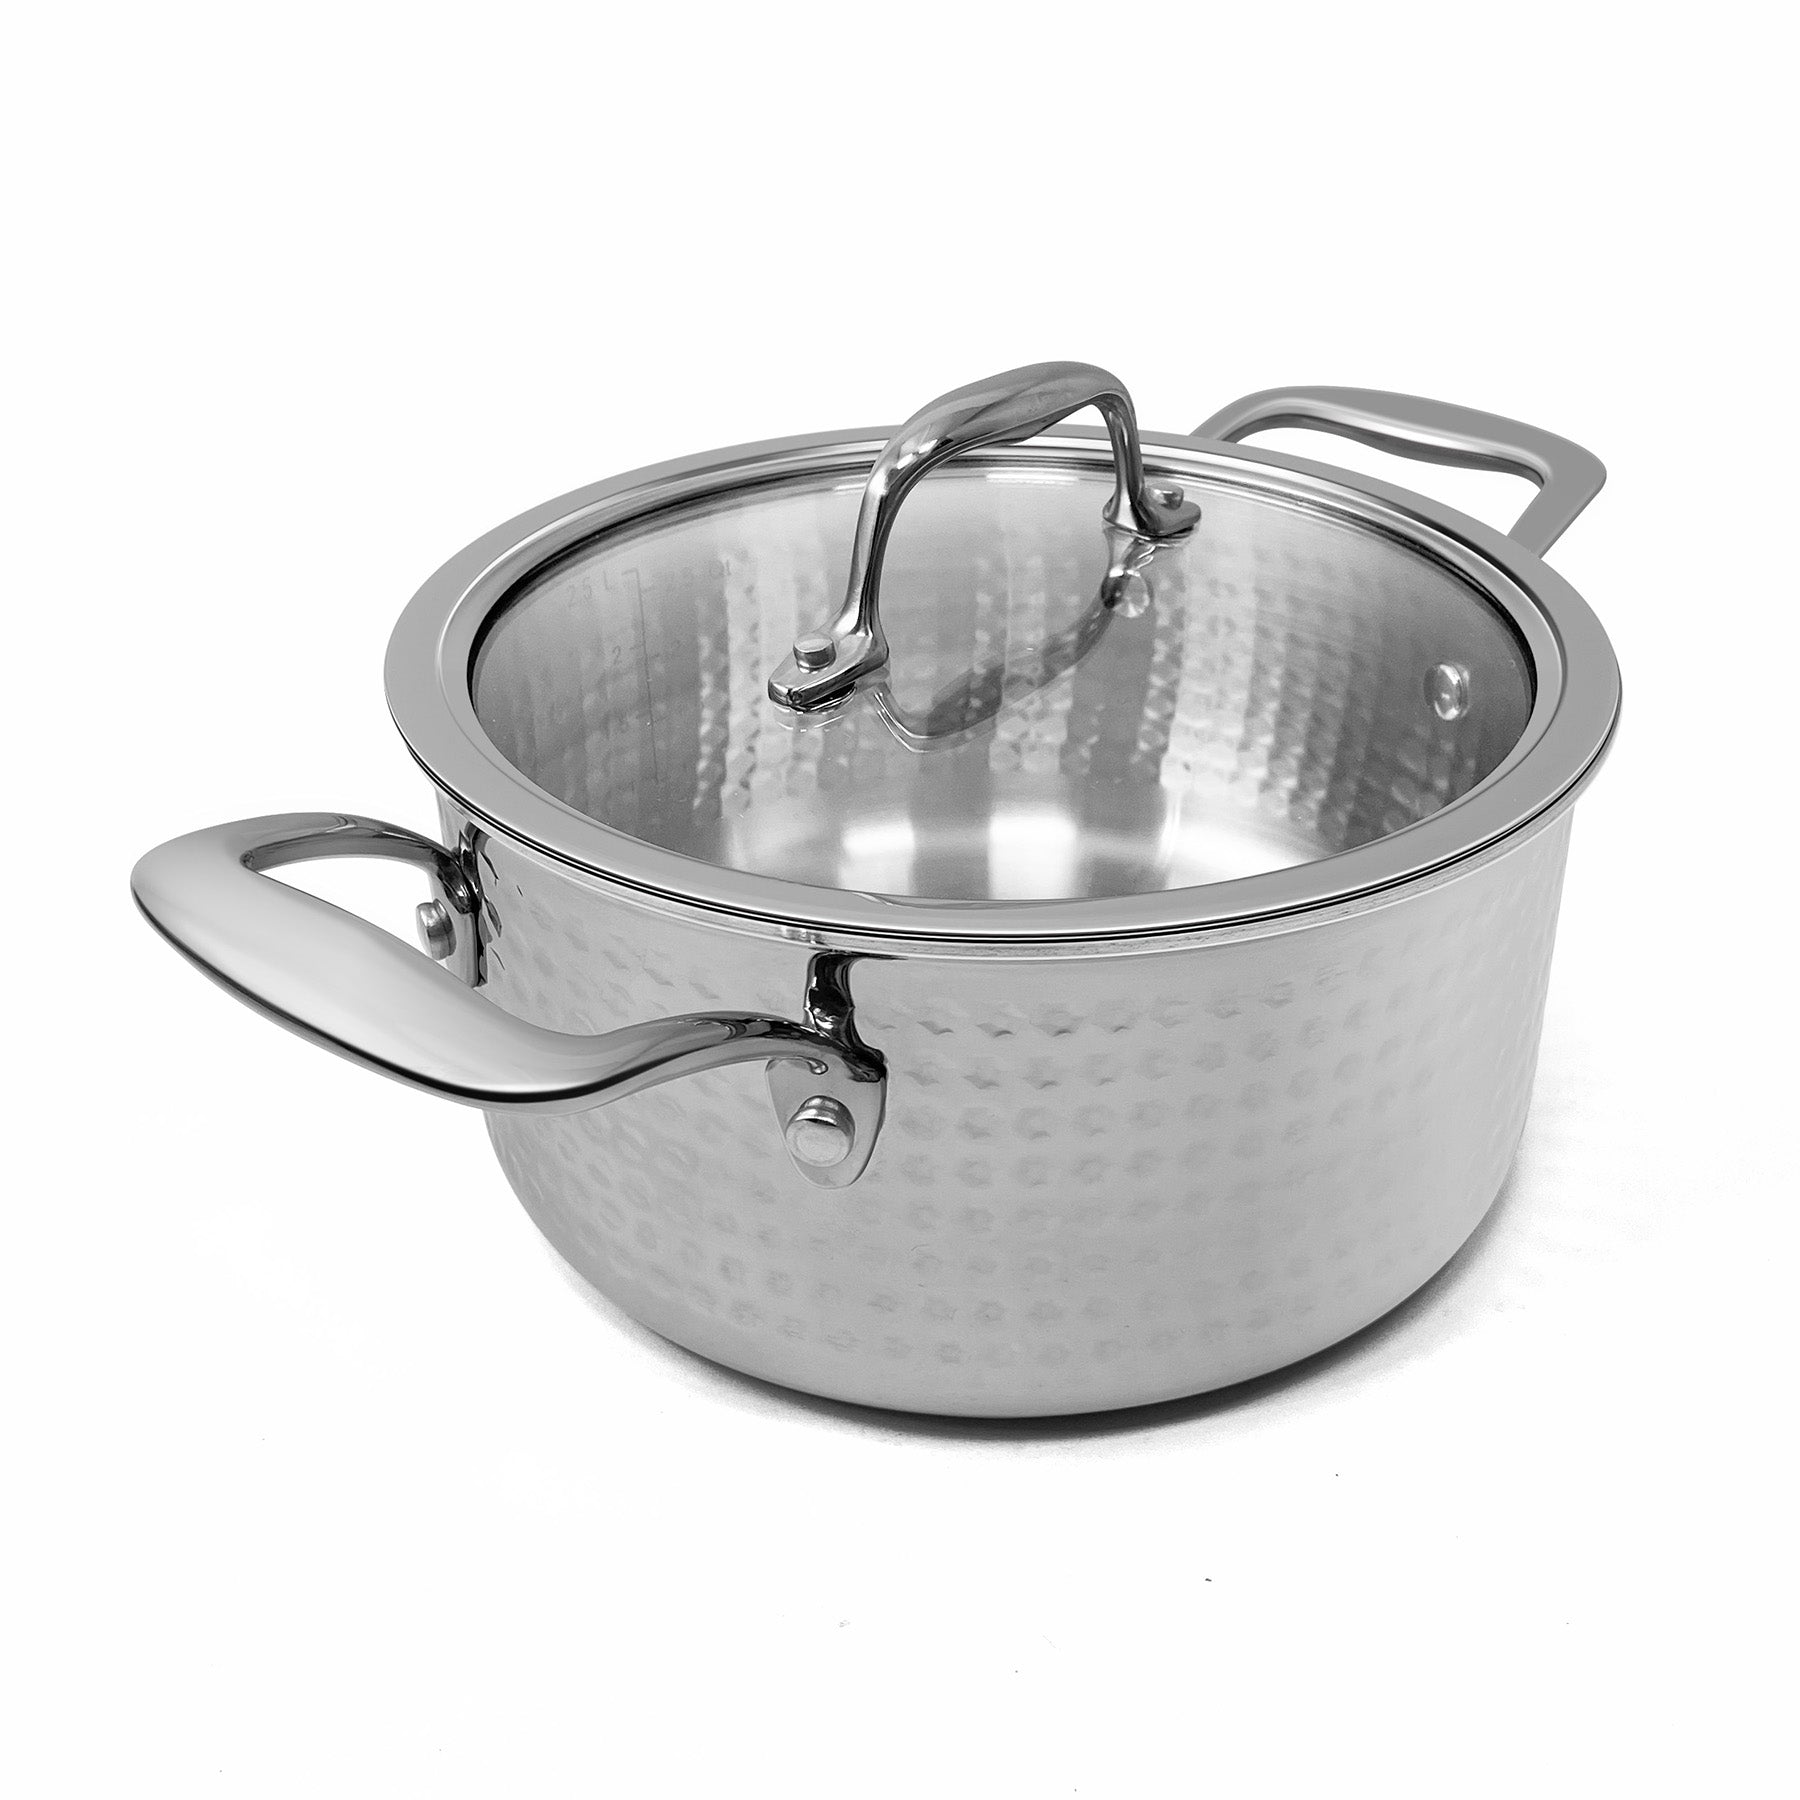 Fortune Candy Stock Pot, 18/8 Stainless Steel, Induction Ready, with Glass Lid, 3.2 QT